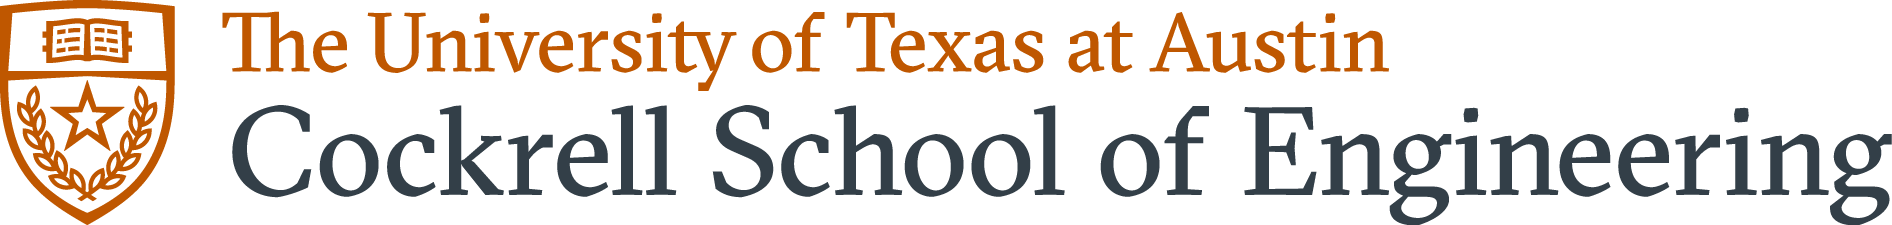 The University of Texas at Austin Cockrell School of Engineering